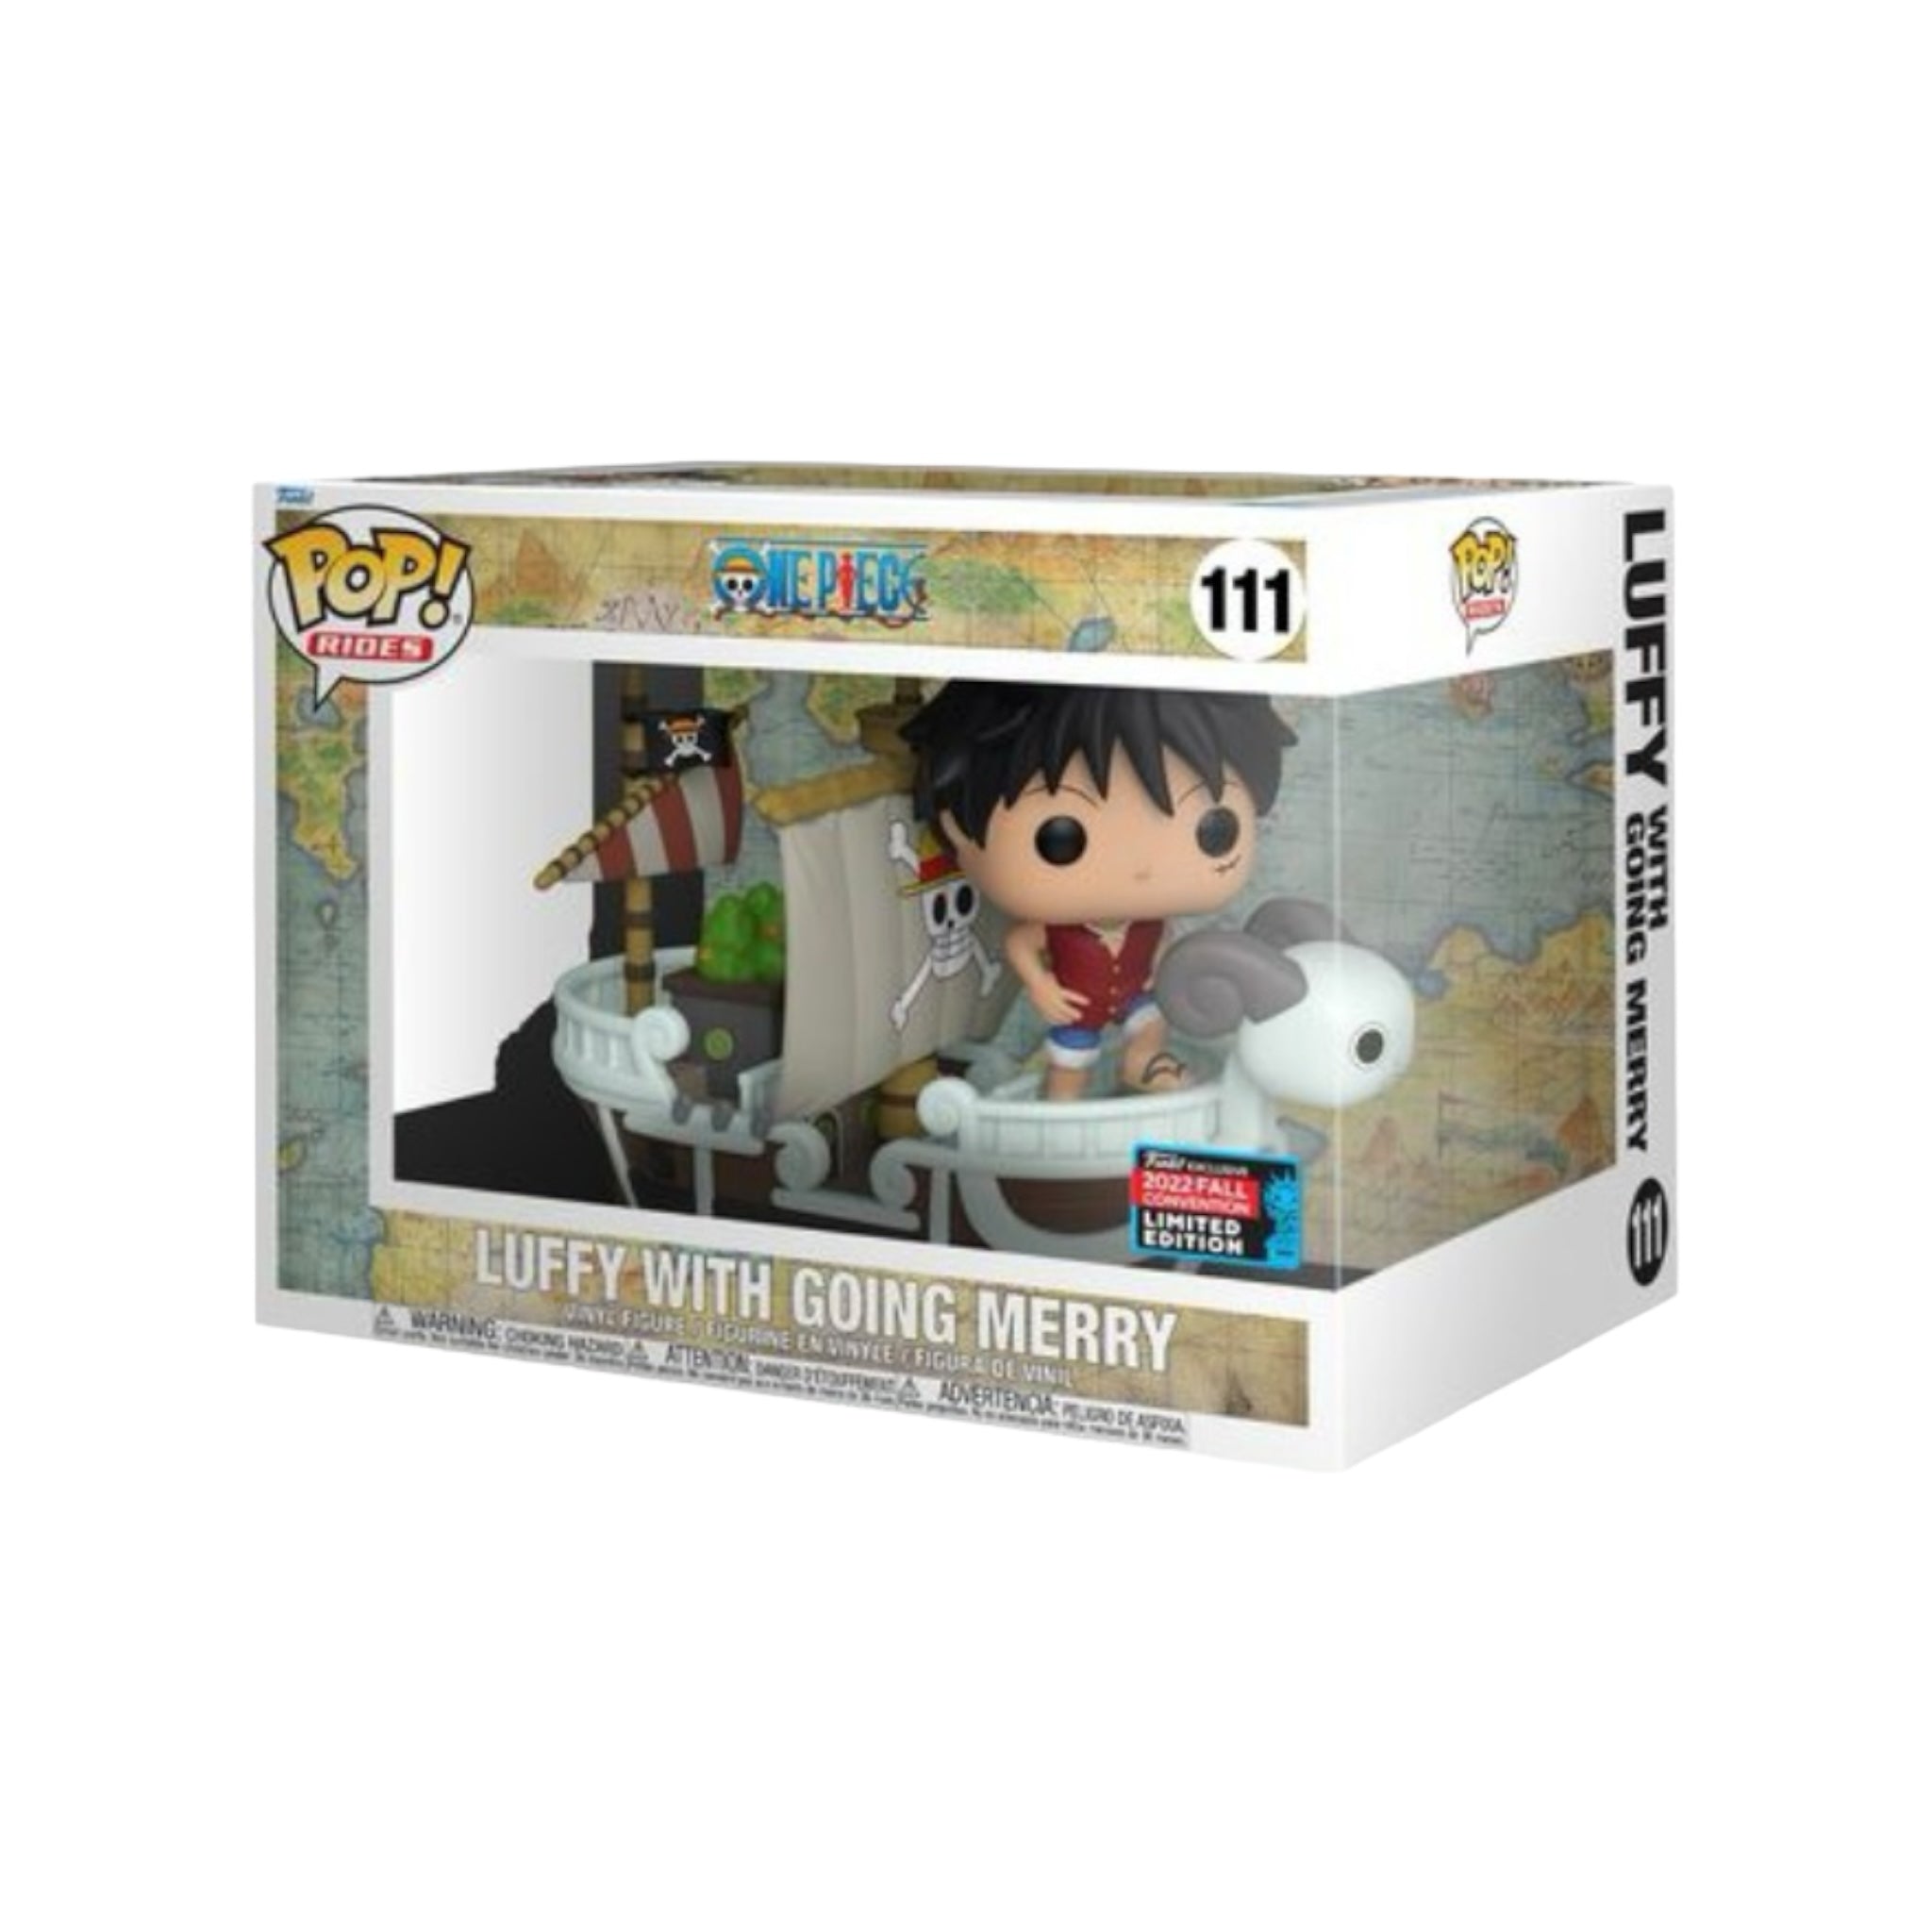 Luffy with Going Merry #111 Funko Pop Ride! - One Piece - NYCC 2022 Shared Exclusive - Condition 8.5/10*